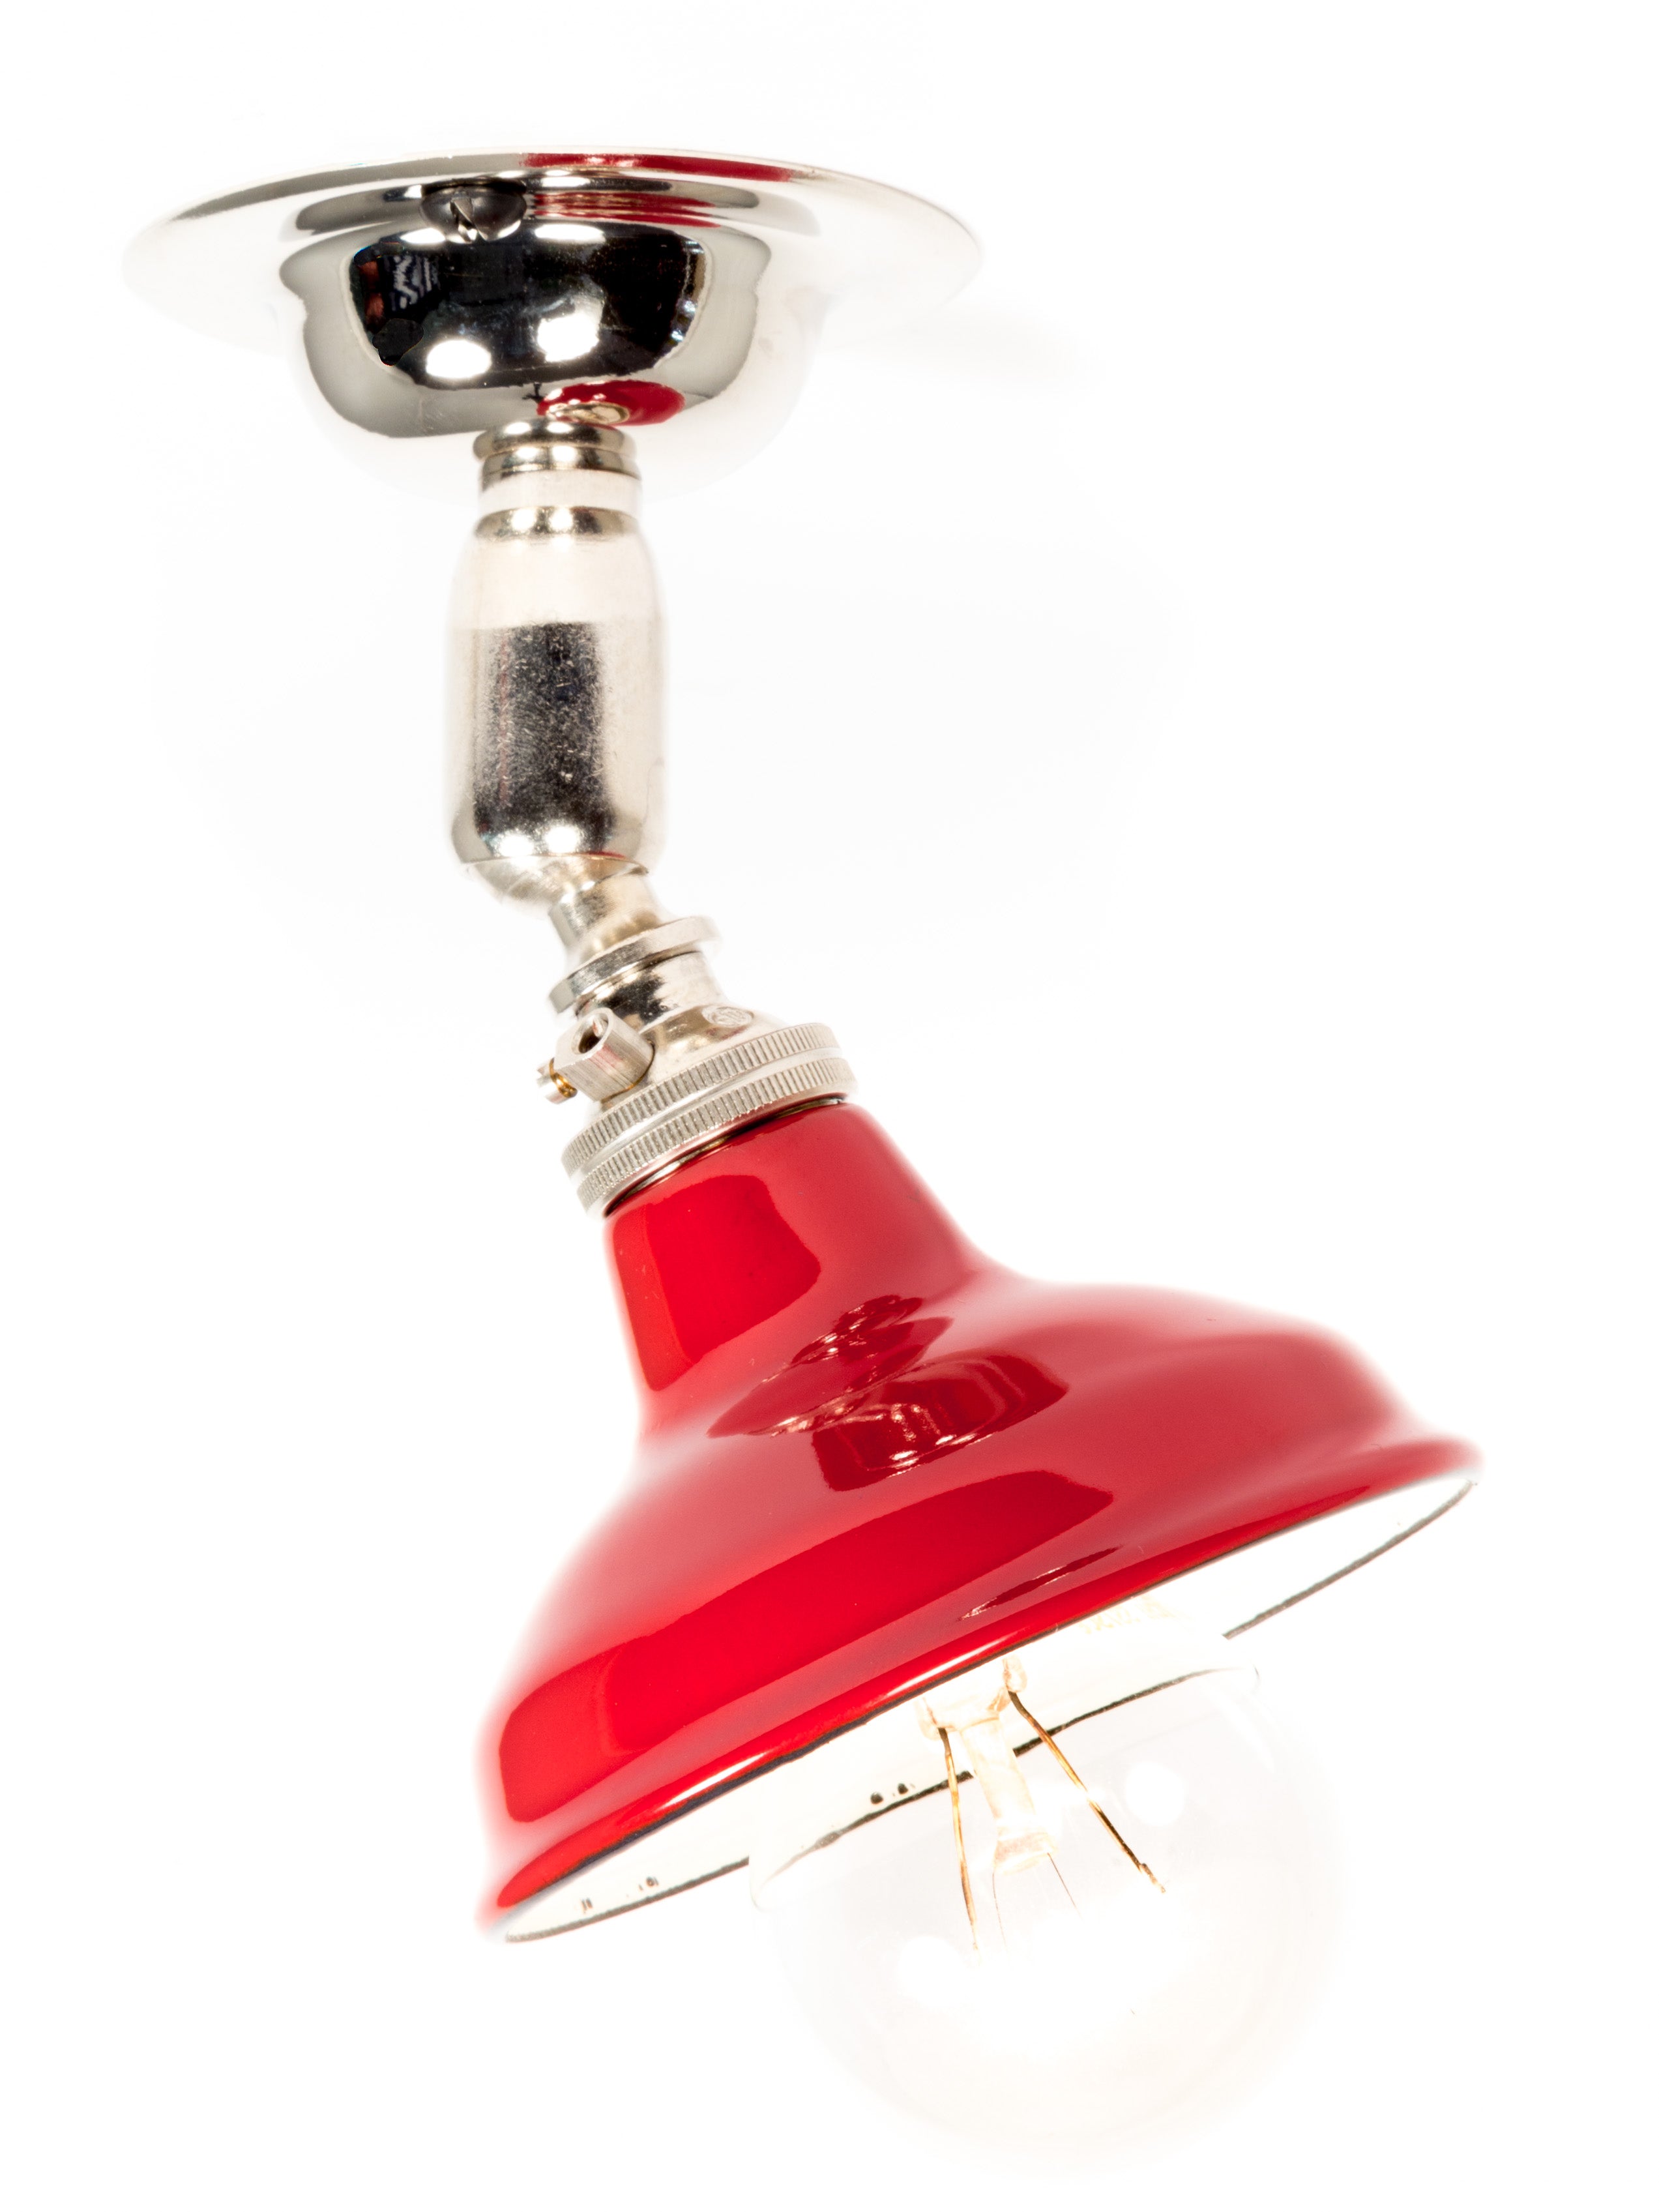 Silver Maria Spotlight With Red Shade | Worn Lighting